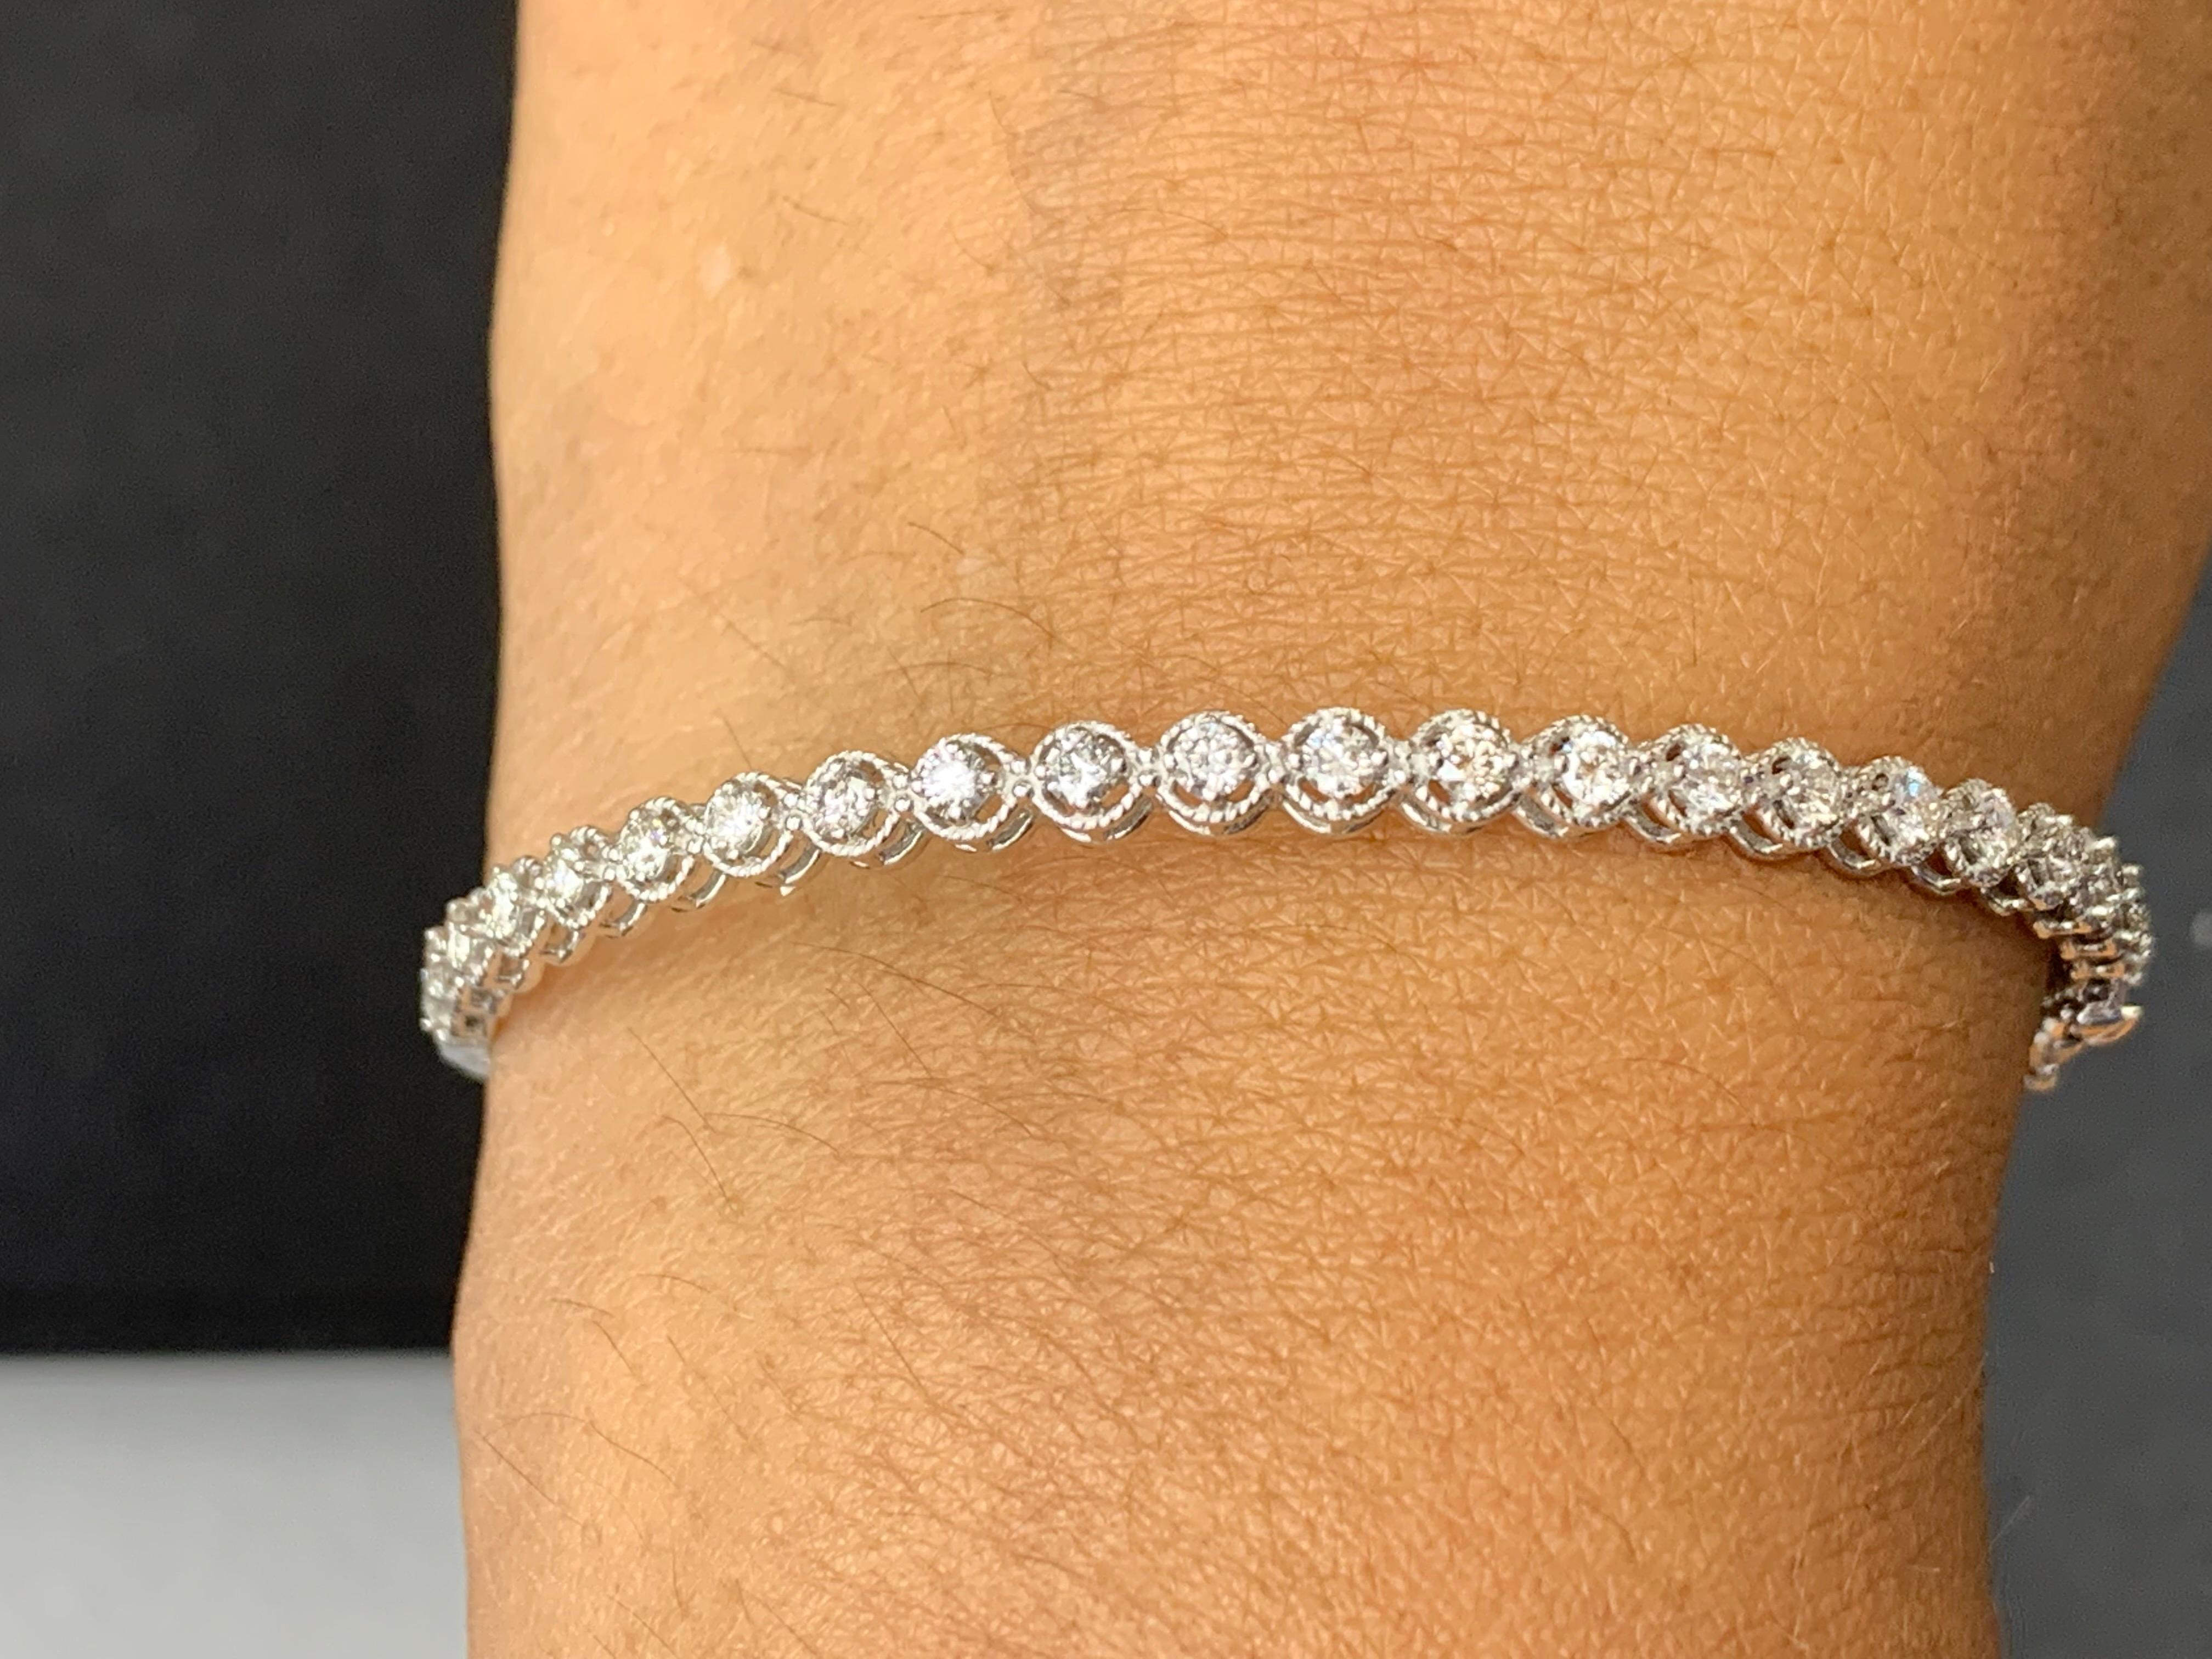 A stunning bangle bracelet set with 23 sparkling round diamonds weighing 0.88 carats total. Diamonds are set in round rope design polished 14k white gold. Double lock mechanism for maximum security. A simple yet dazzling piece.